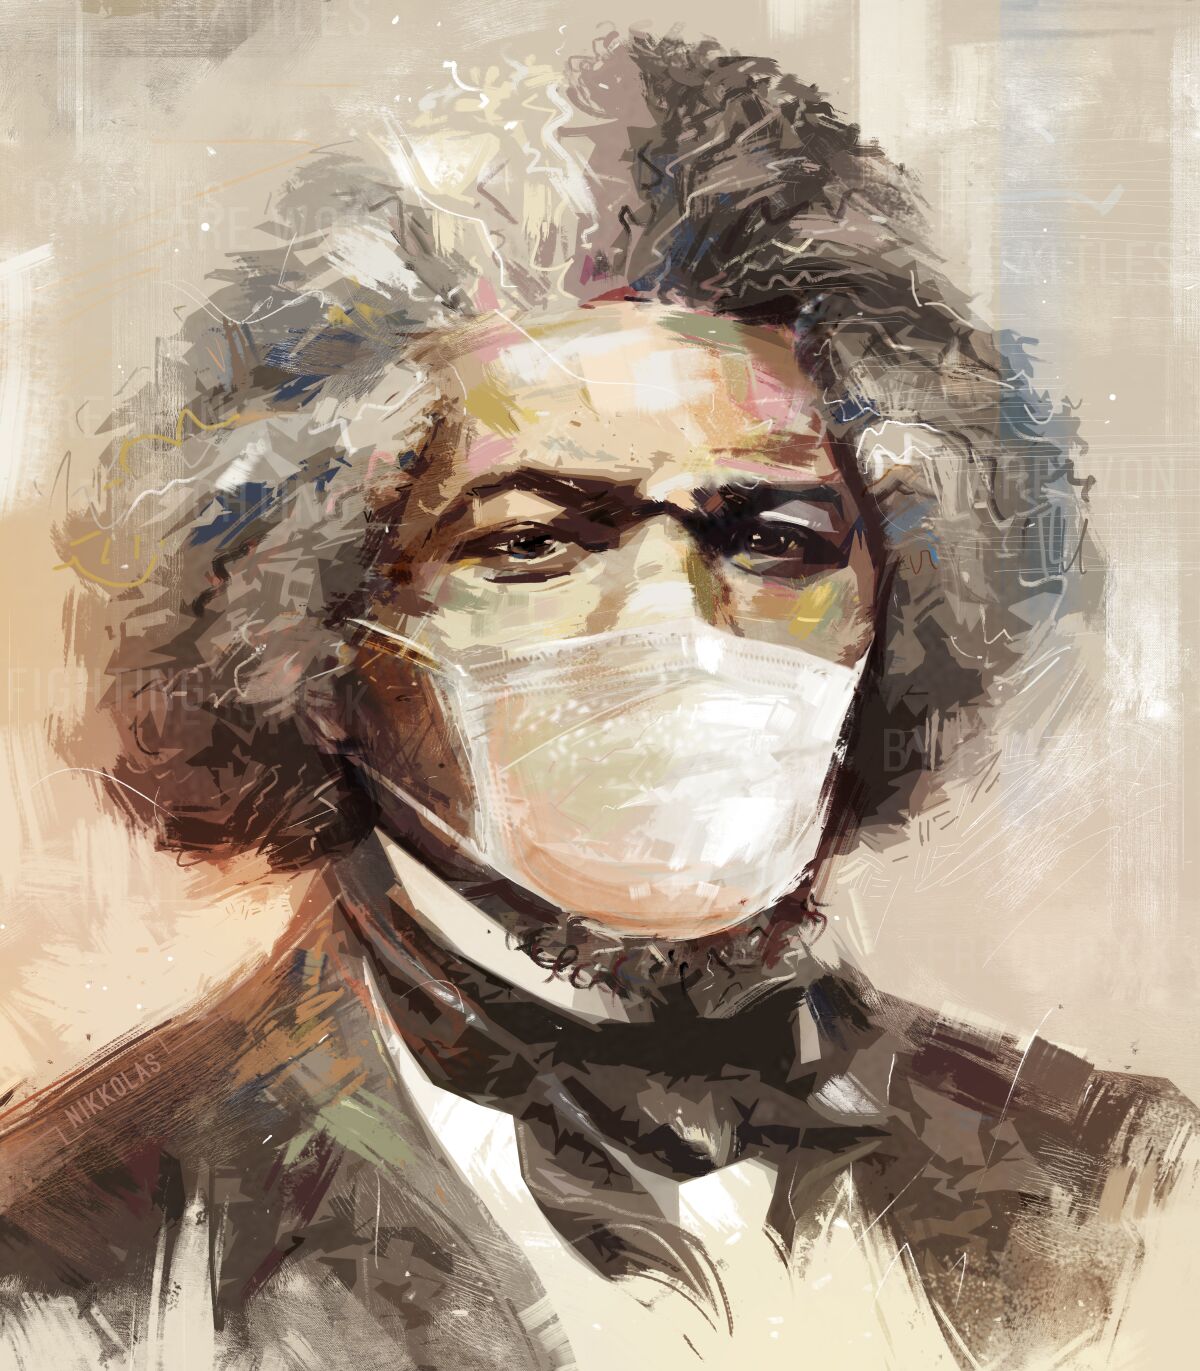 A portrait of Frederick Douglass highlights how the coronaviurs pandemic is unequally affecting the black community.